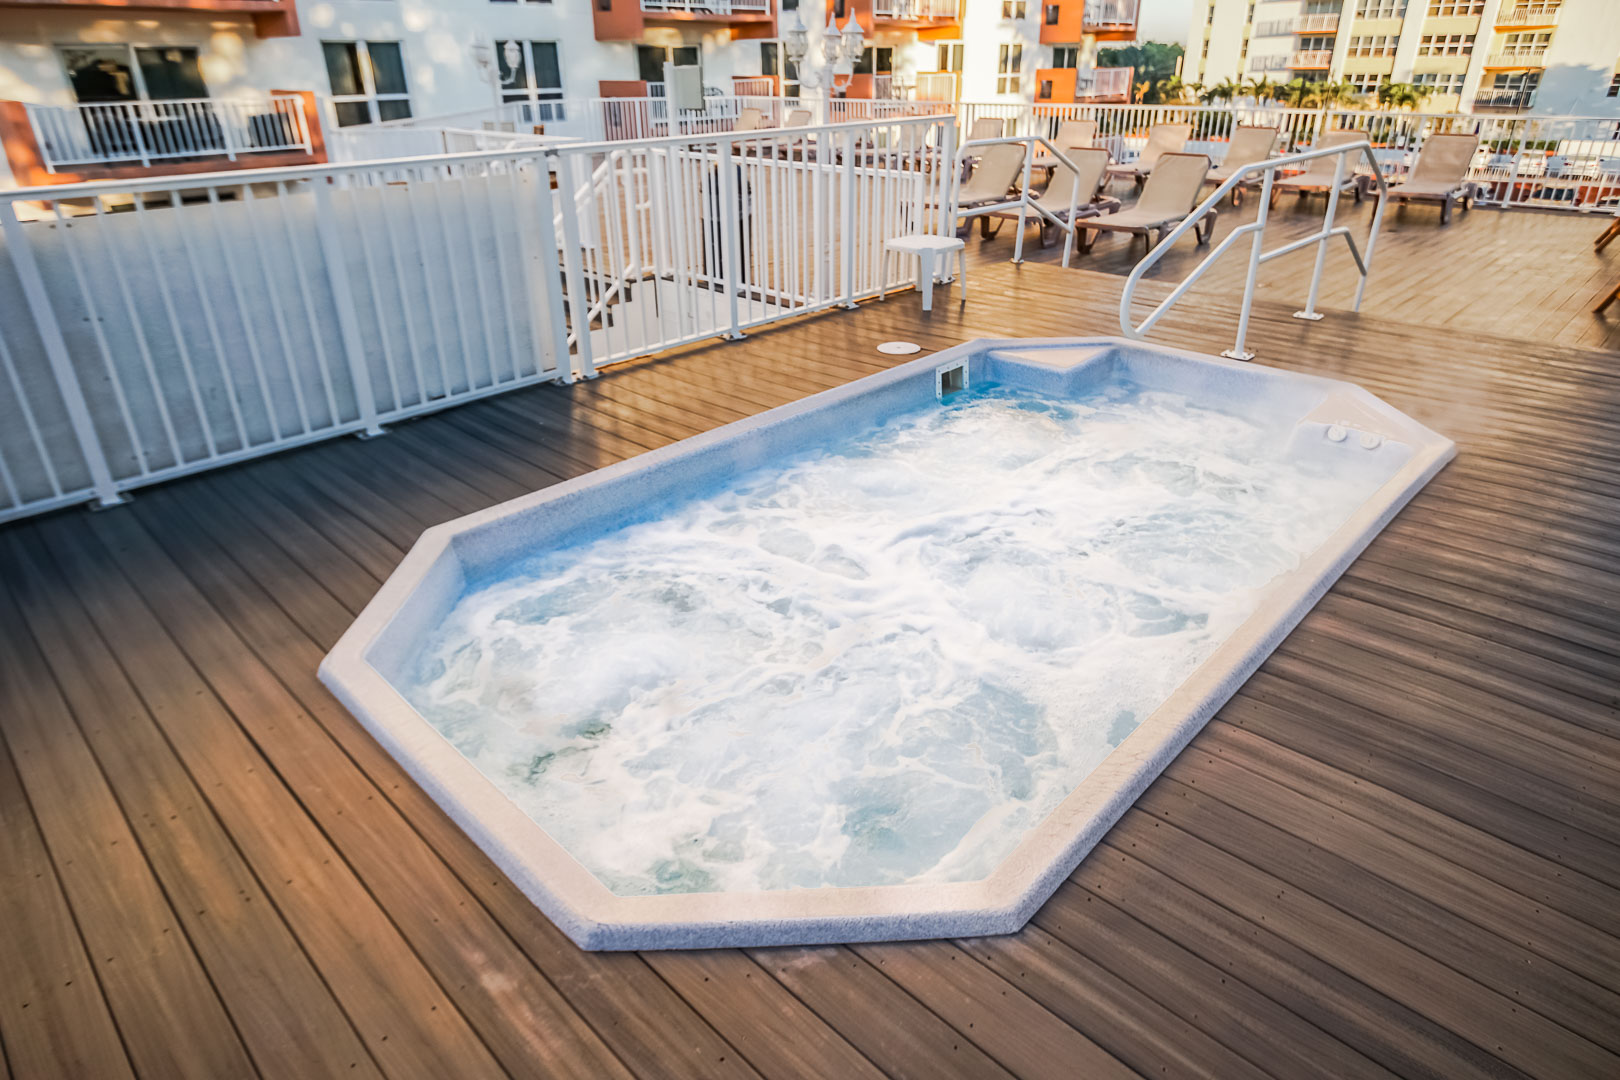 Jacuzzi at the pool deck at VRI's Ft. Lauderdale Beach Resort in Florida.